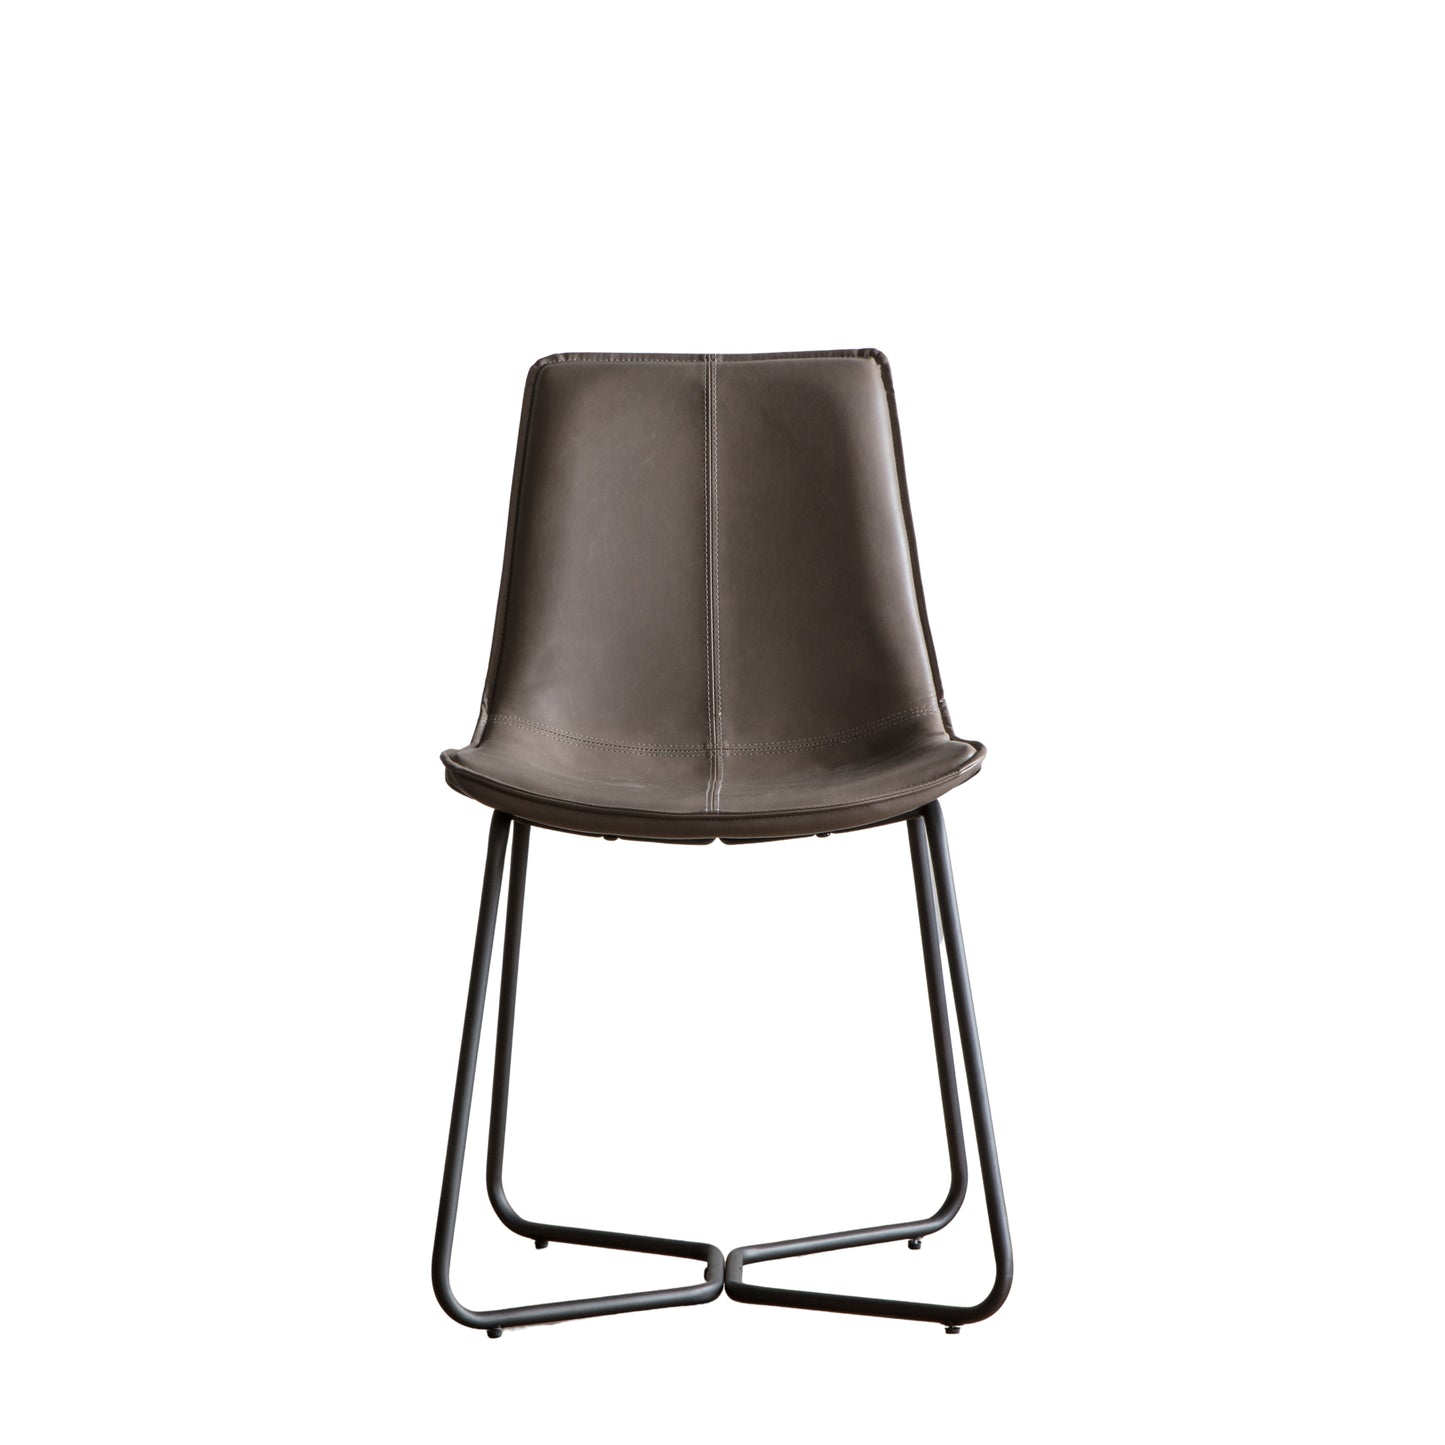 A brown leather dining chair with a black metal frame, perfect for interior decor and home furniture.